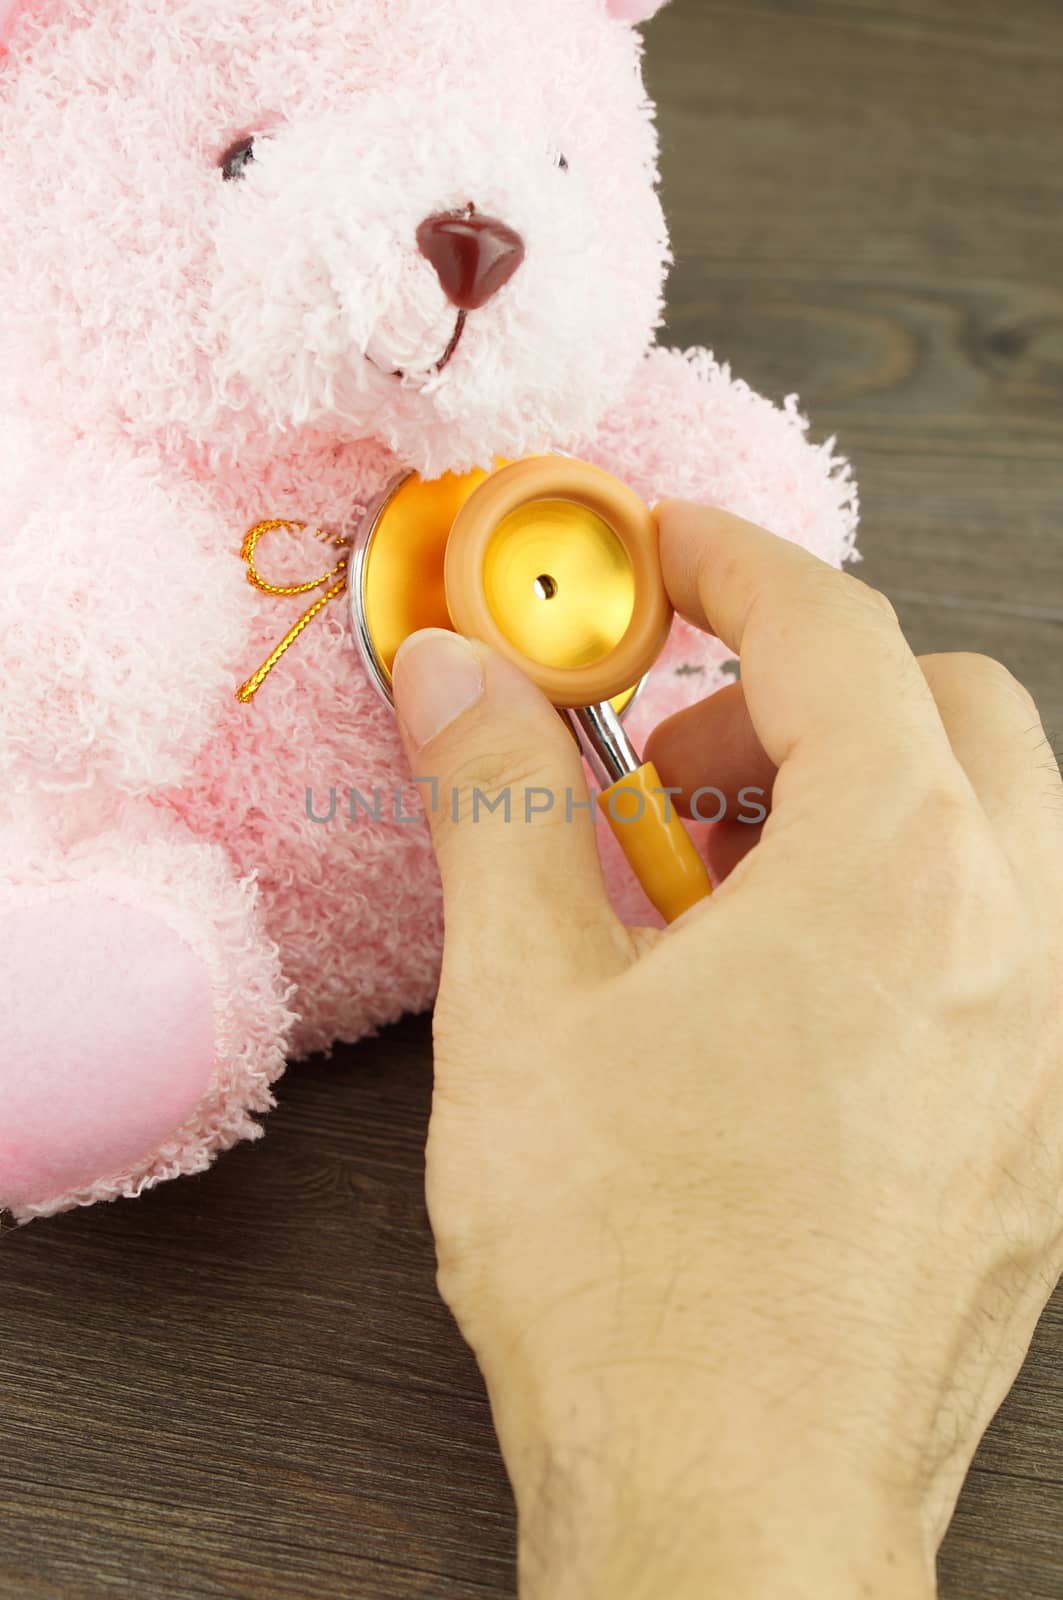 Hand of man holding stethoscope to examination the pink doll.                           